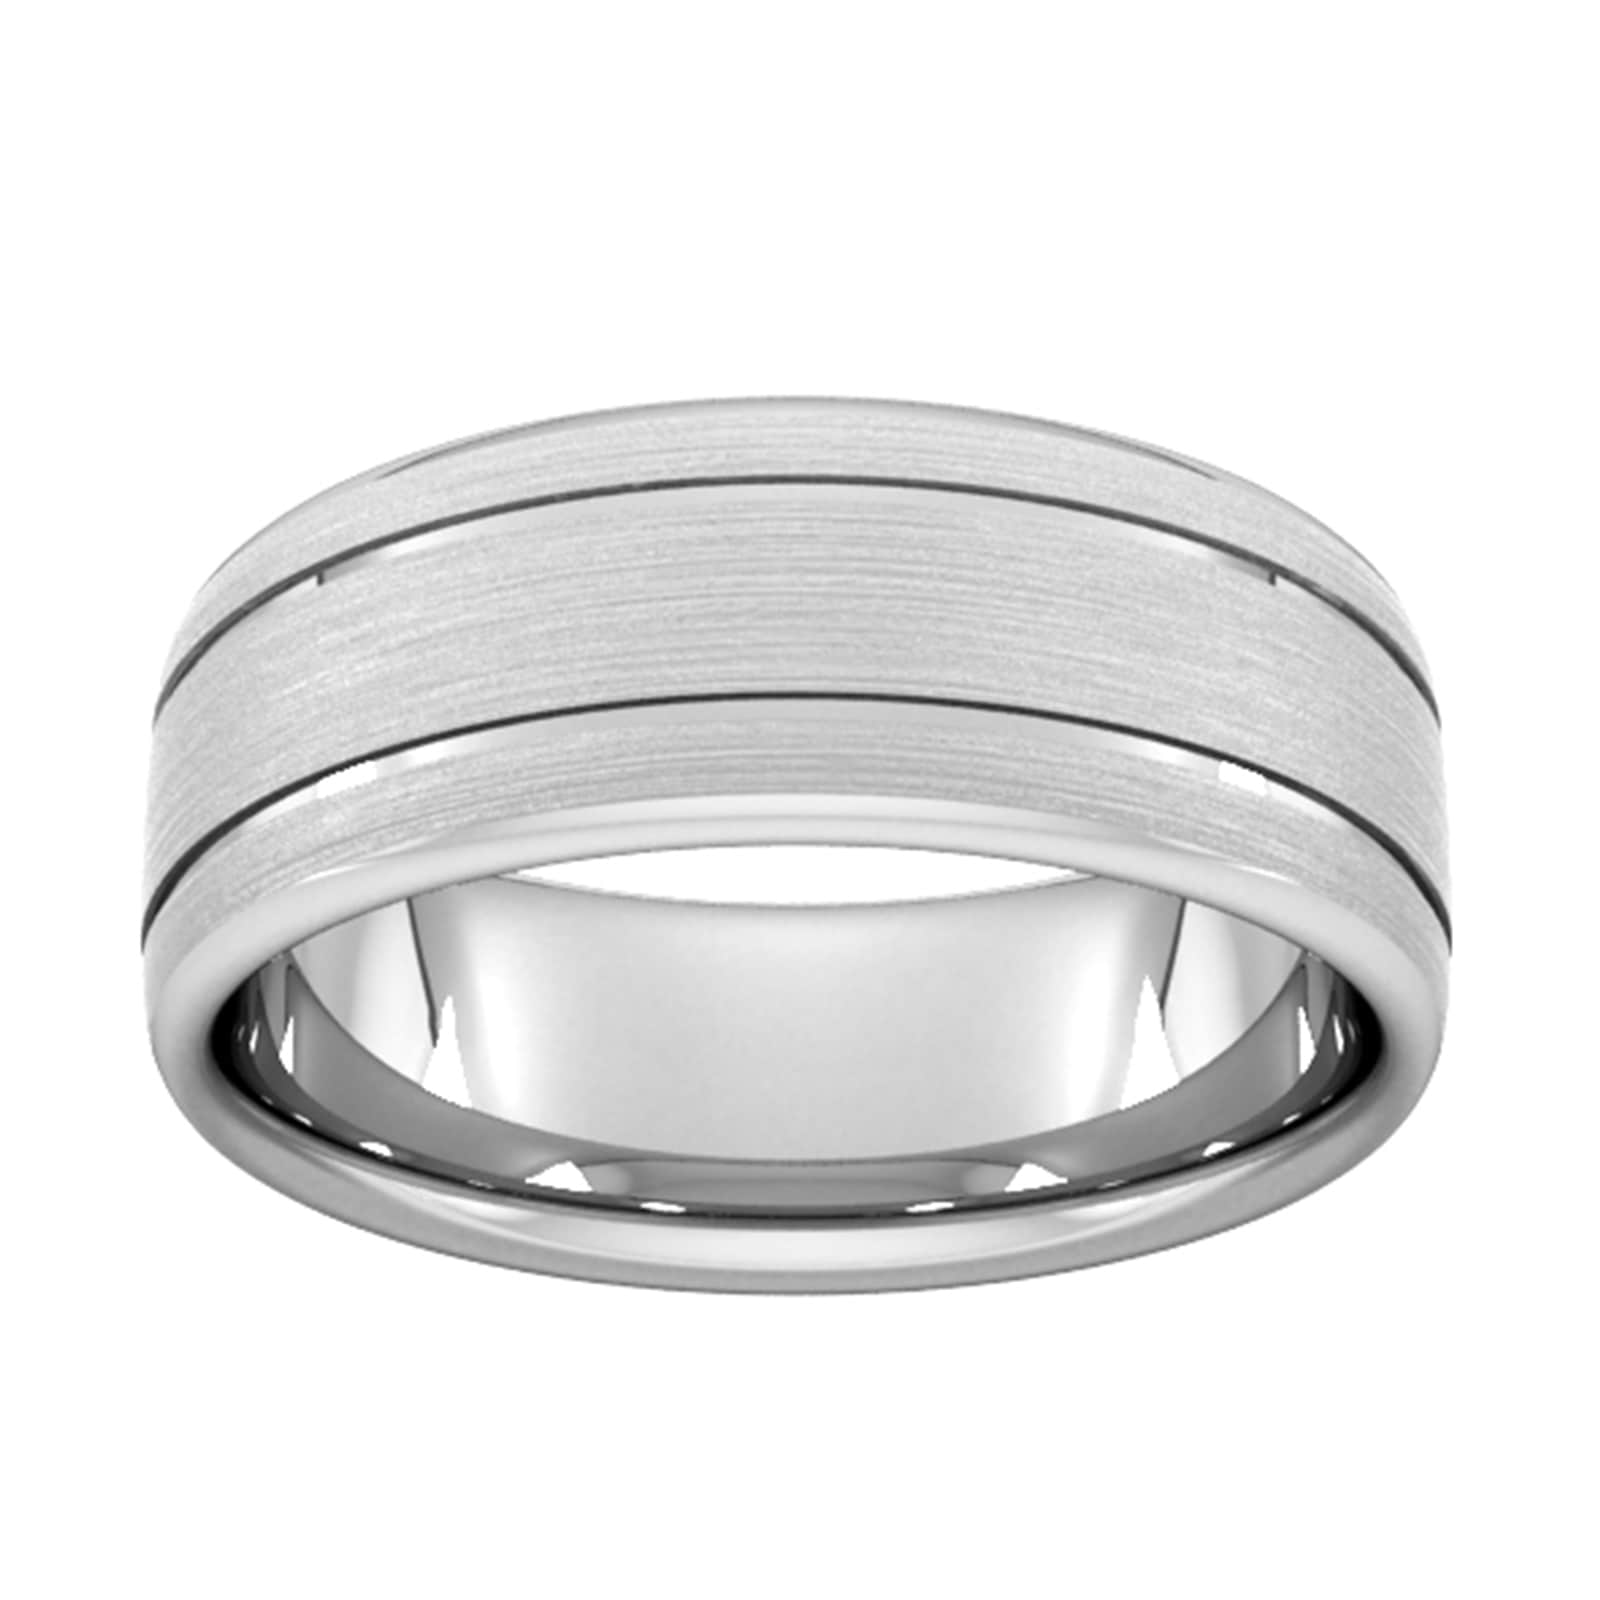 8mm D Shape Standard Matt Finish With Double Grooves Wedding Ring In 9 Carat White Gold - Ring Size J